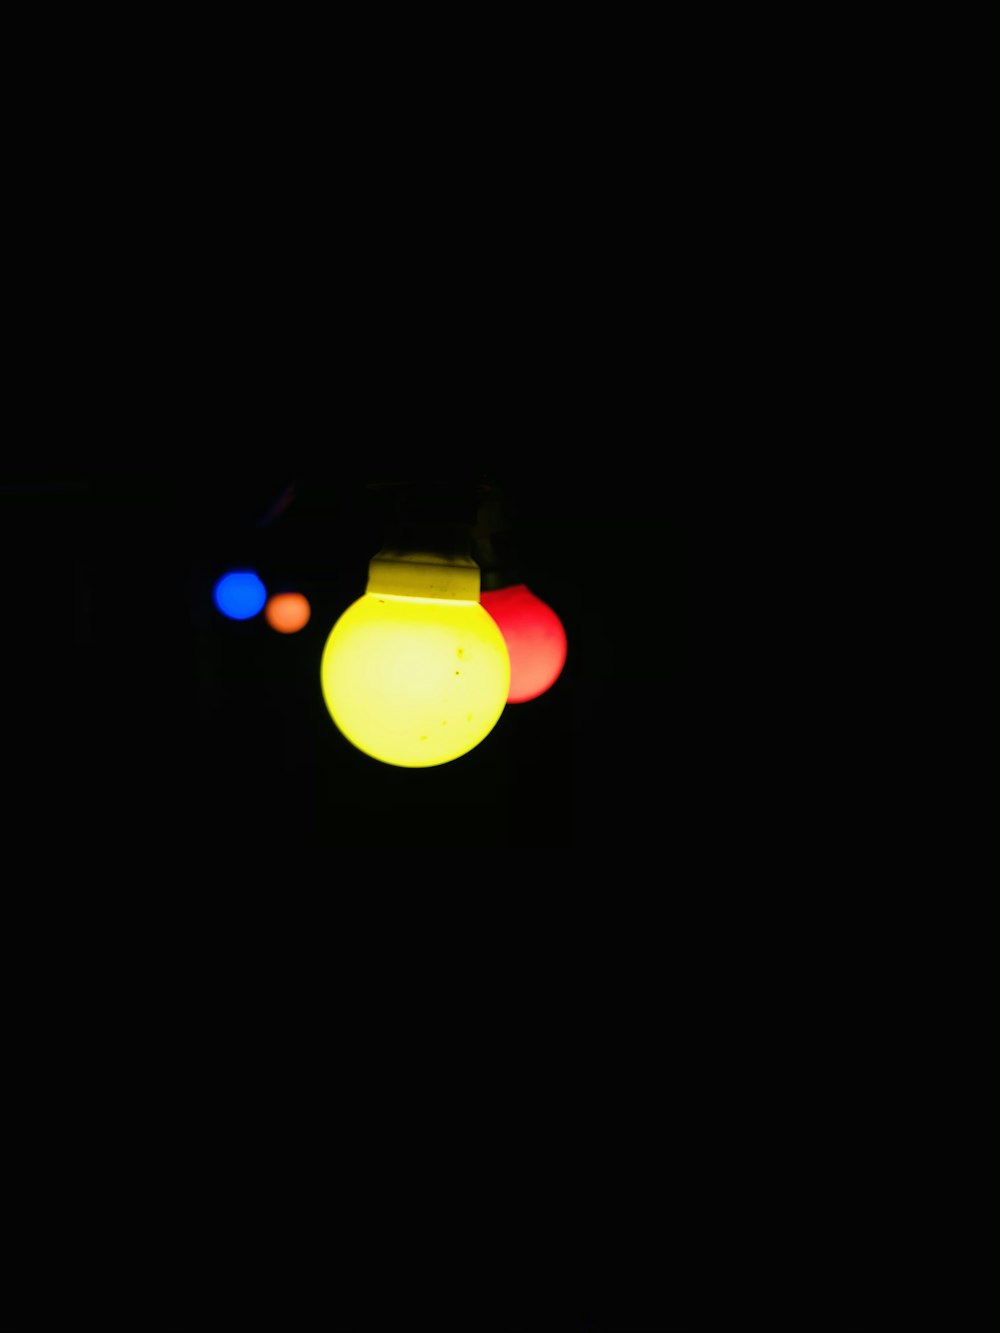 a close up of a traffic light in the dark